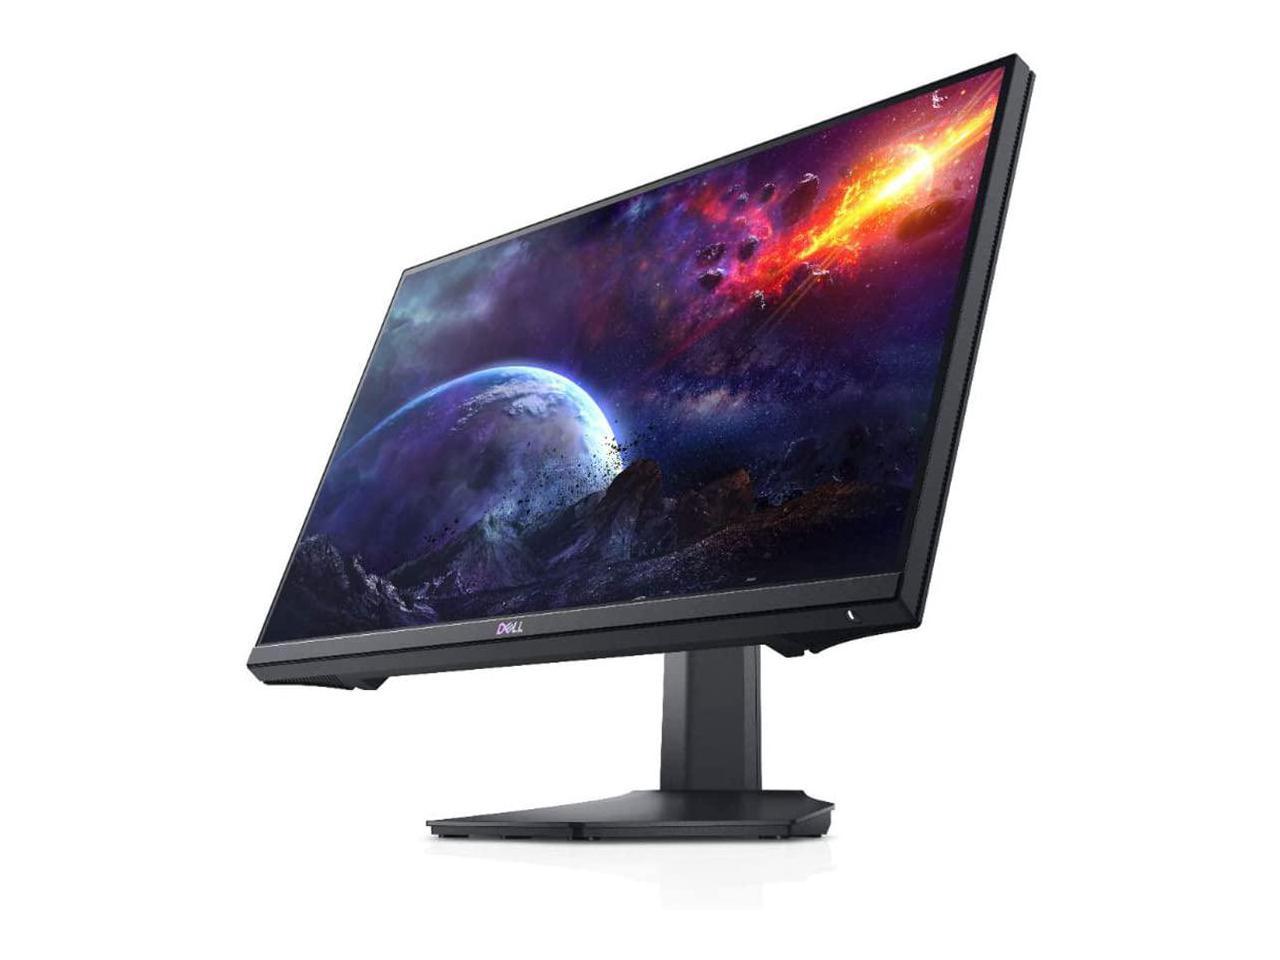 BEST BUDGET GAMING MONITOR IN NEPAL